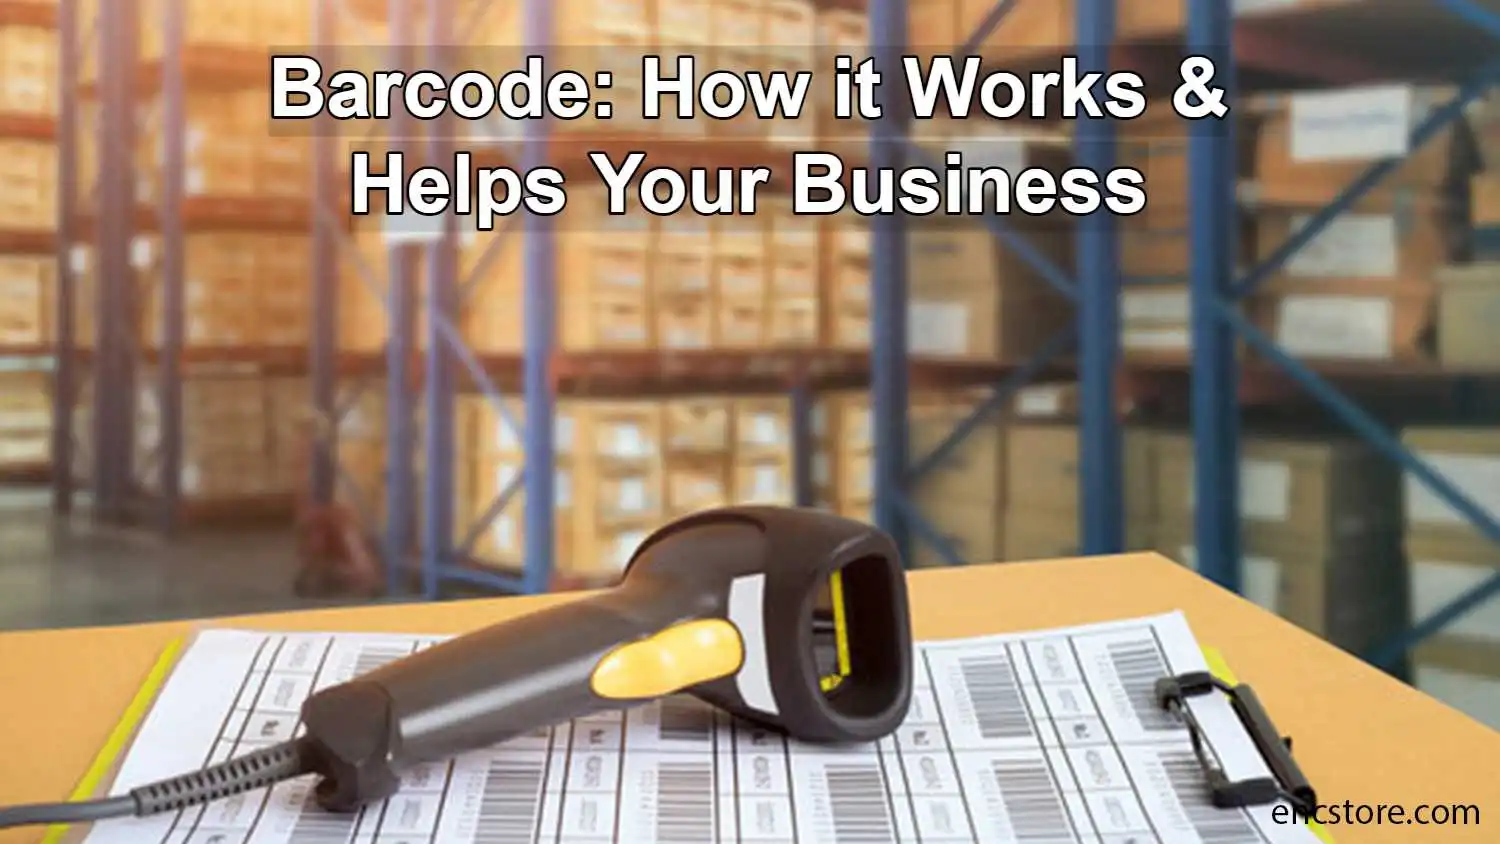 Barcode: How It Works & Helps Your Business?